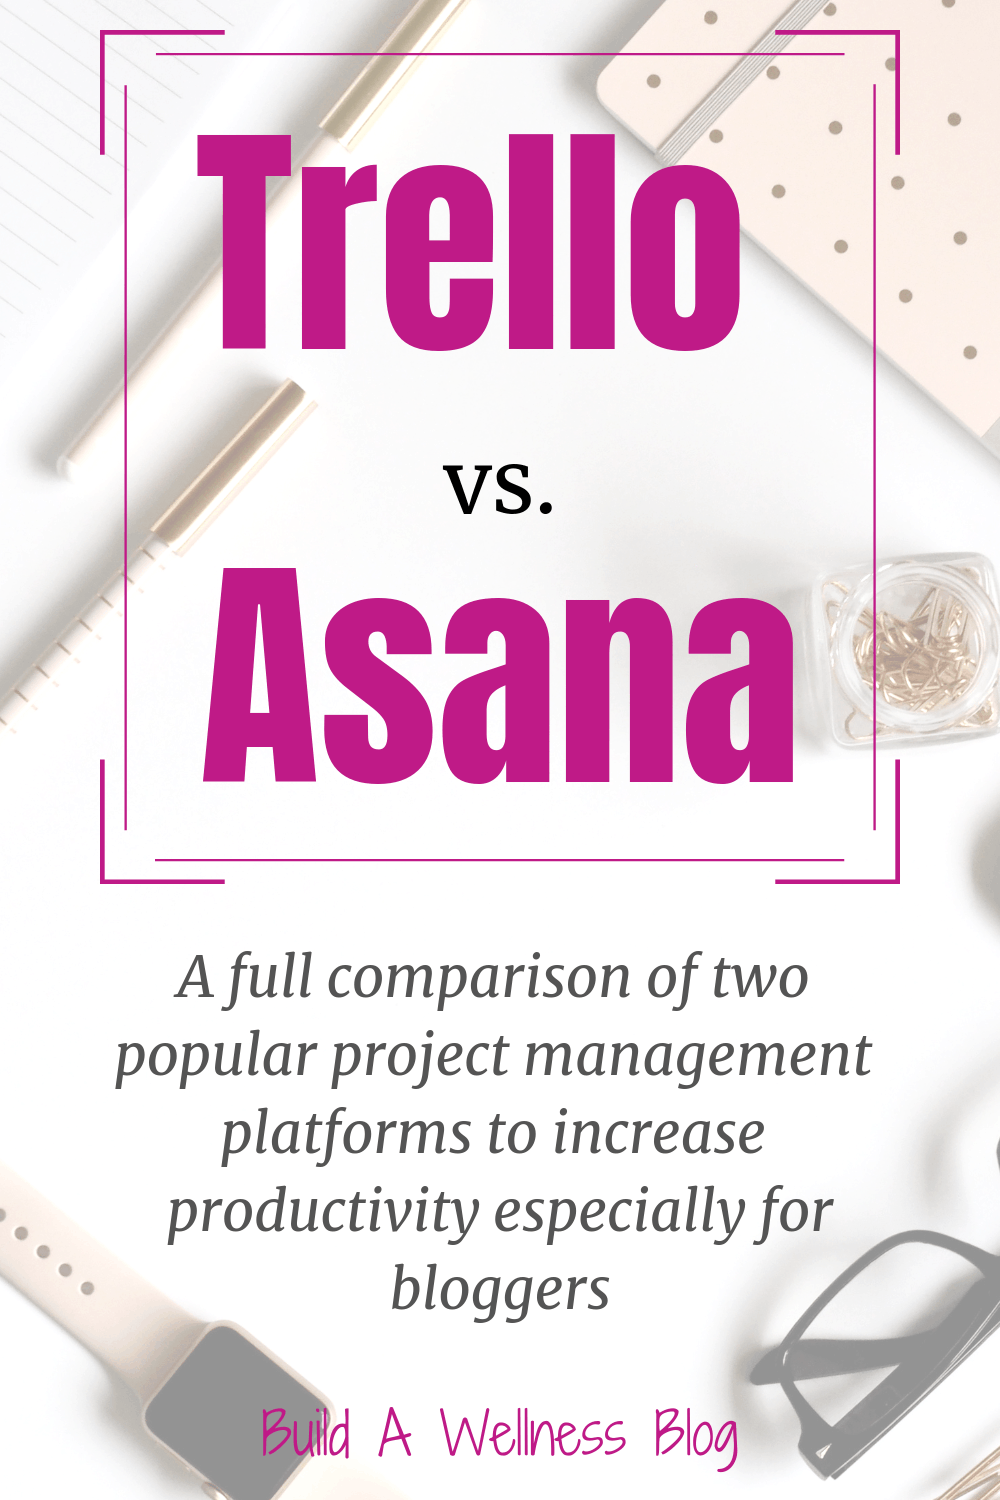 A flat lay of office supplies with a text overlay about trello vs. asana